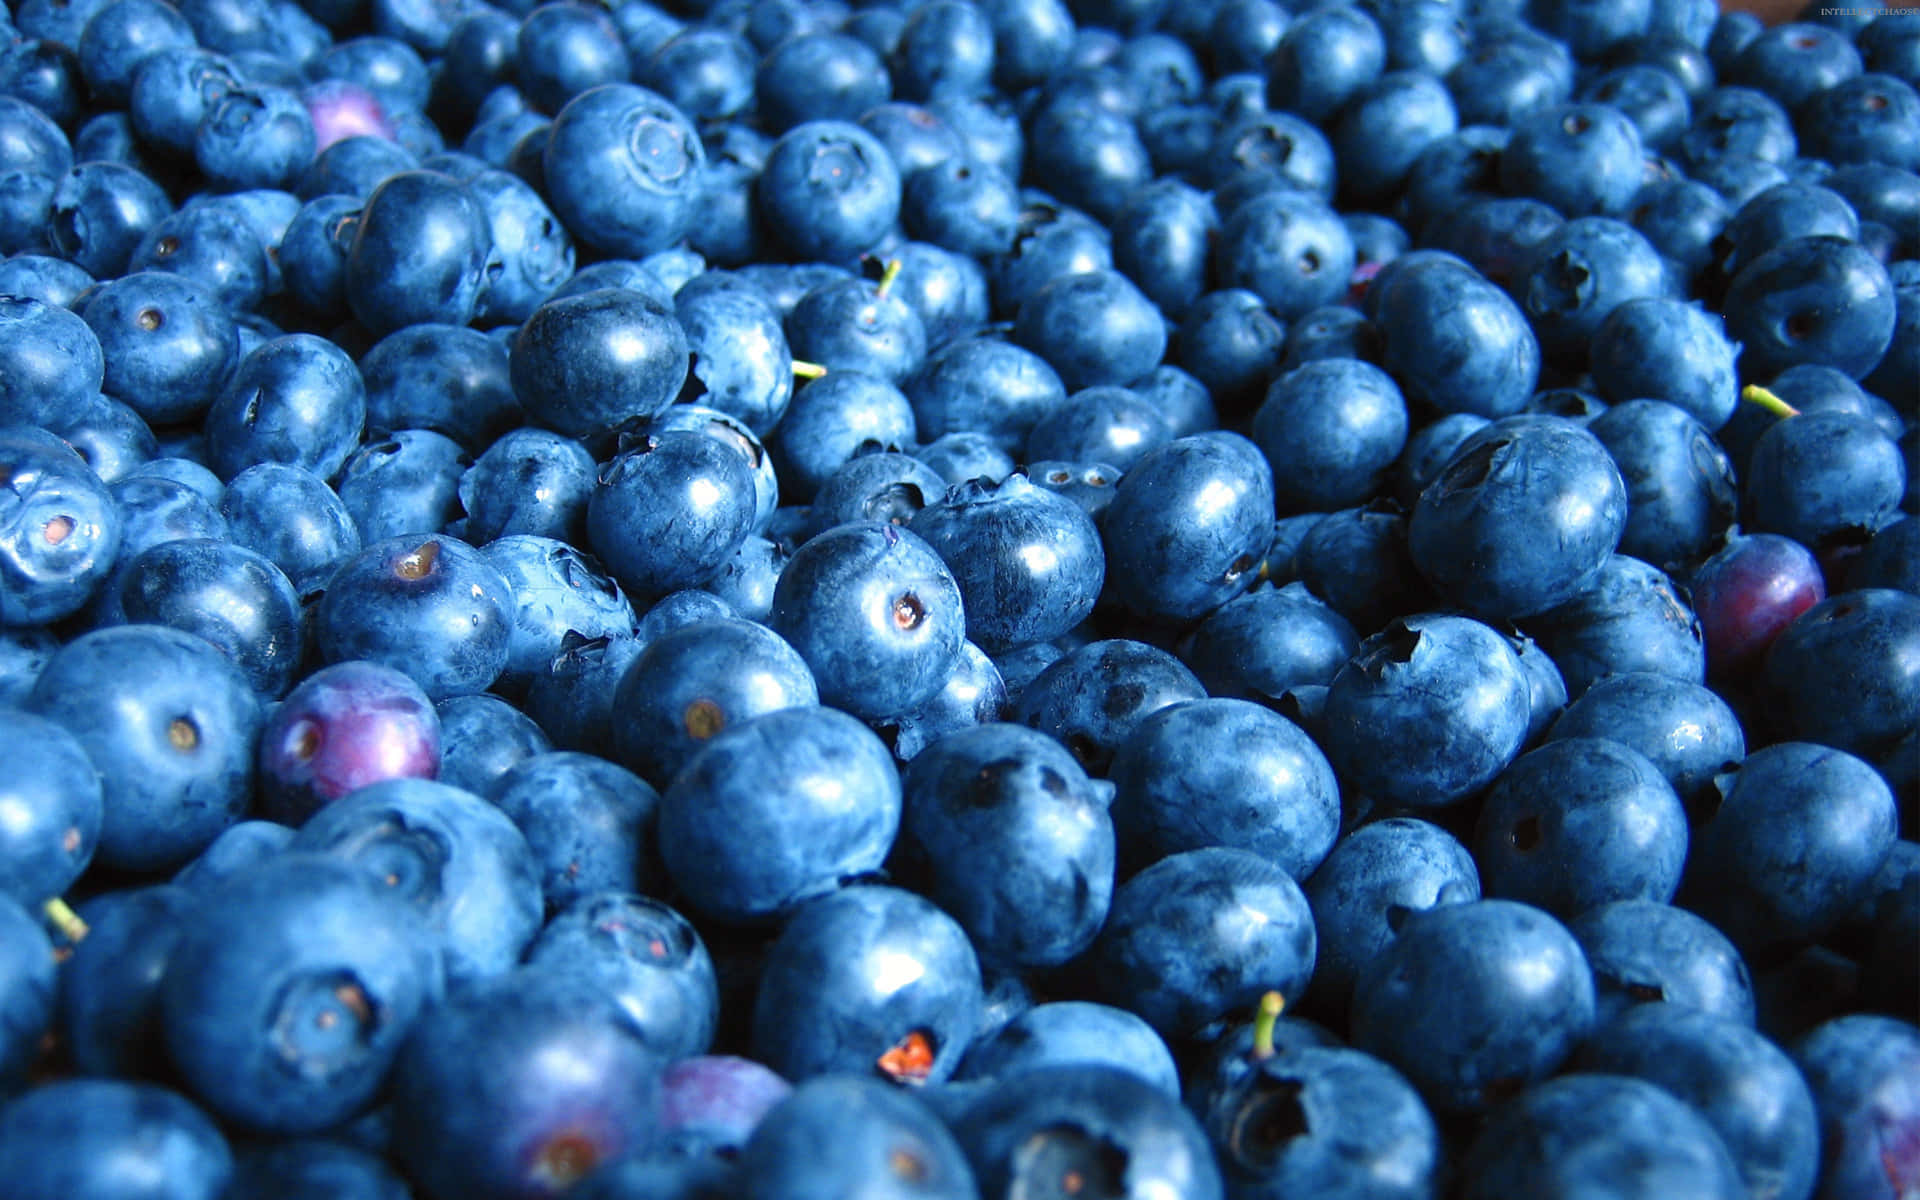 A field full of juicy blueberries, ready for picking.